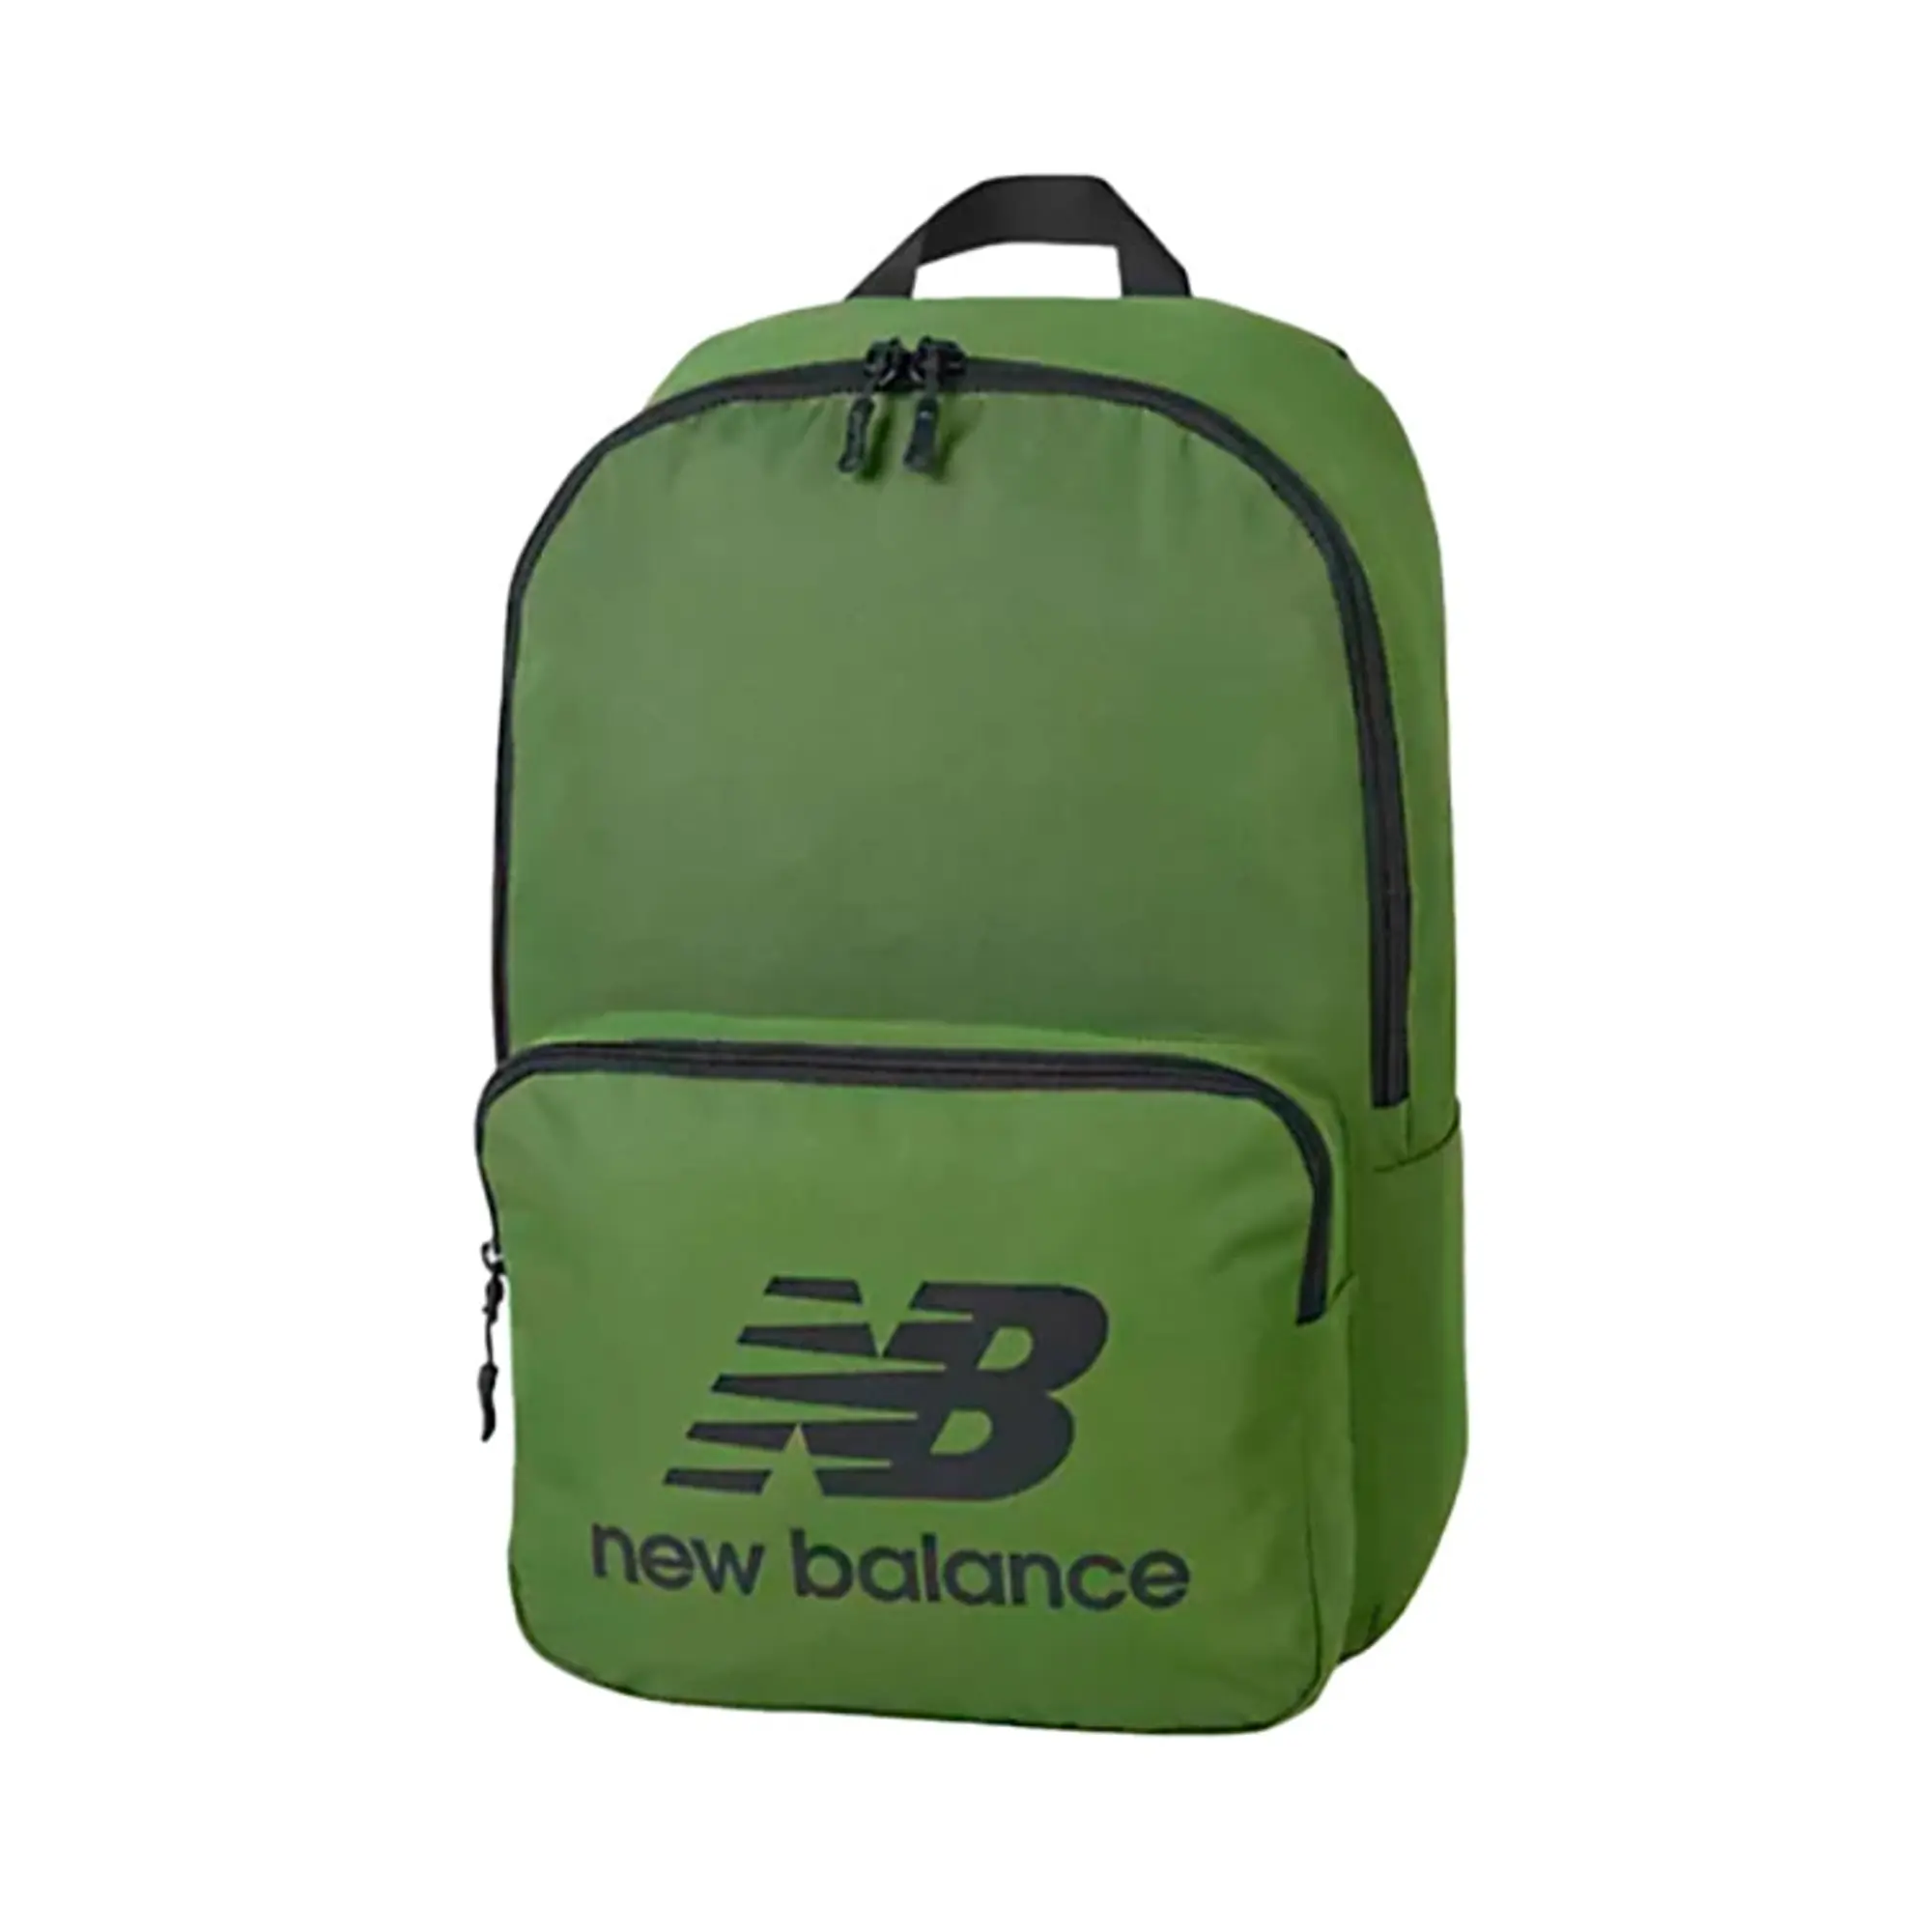 New Balance Unisex Team Classic Backpack in Green/Black Polyester